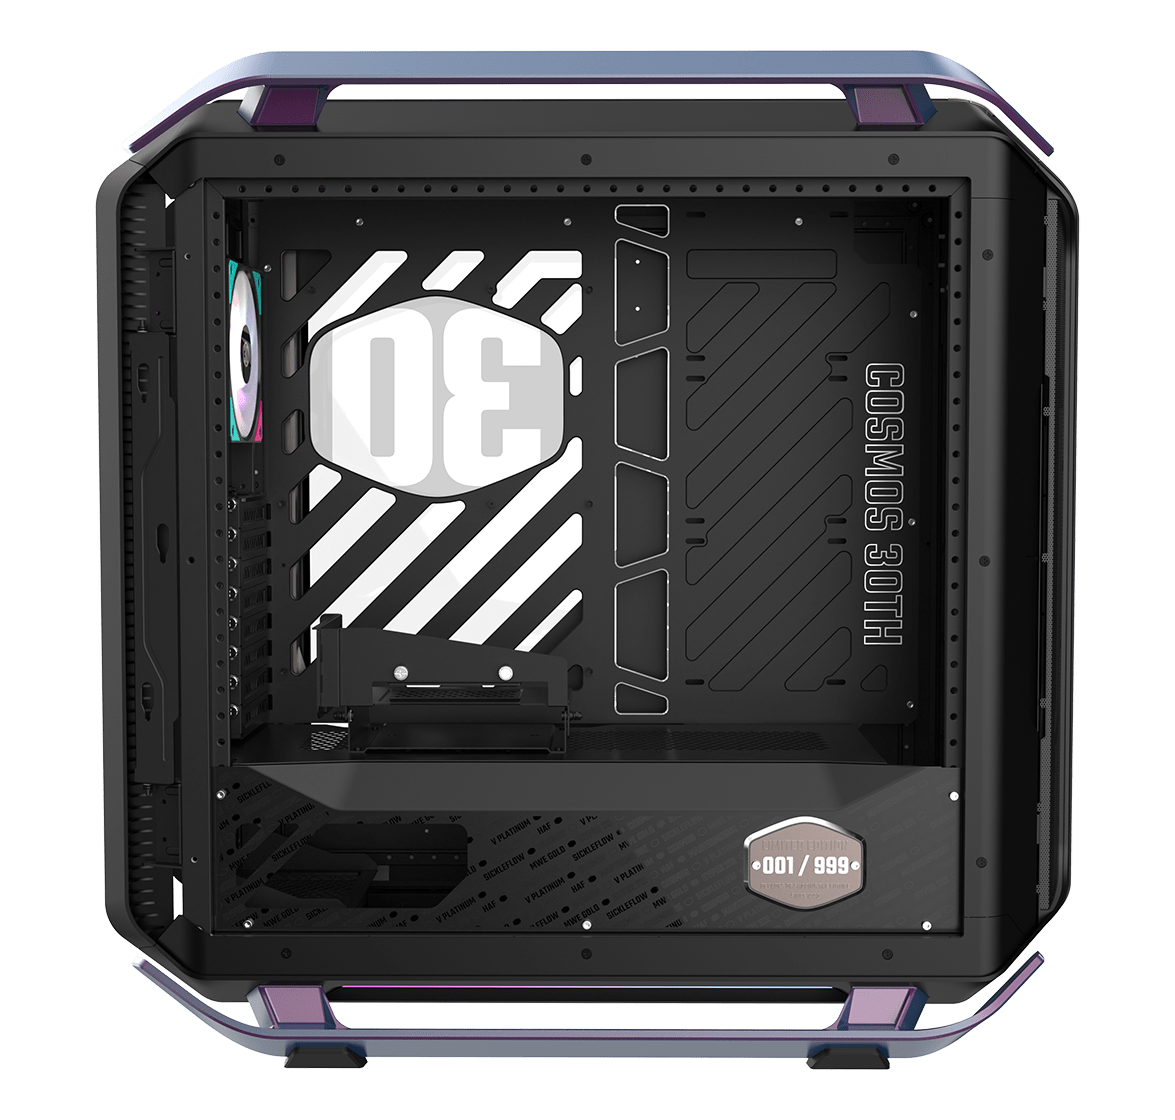 Cooler Master: arriva "Cosmos Infinity 30th Anniversary Edition"